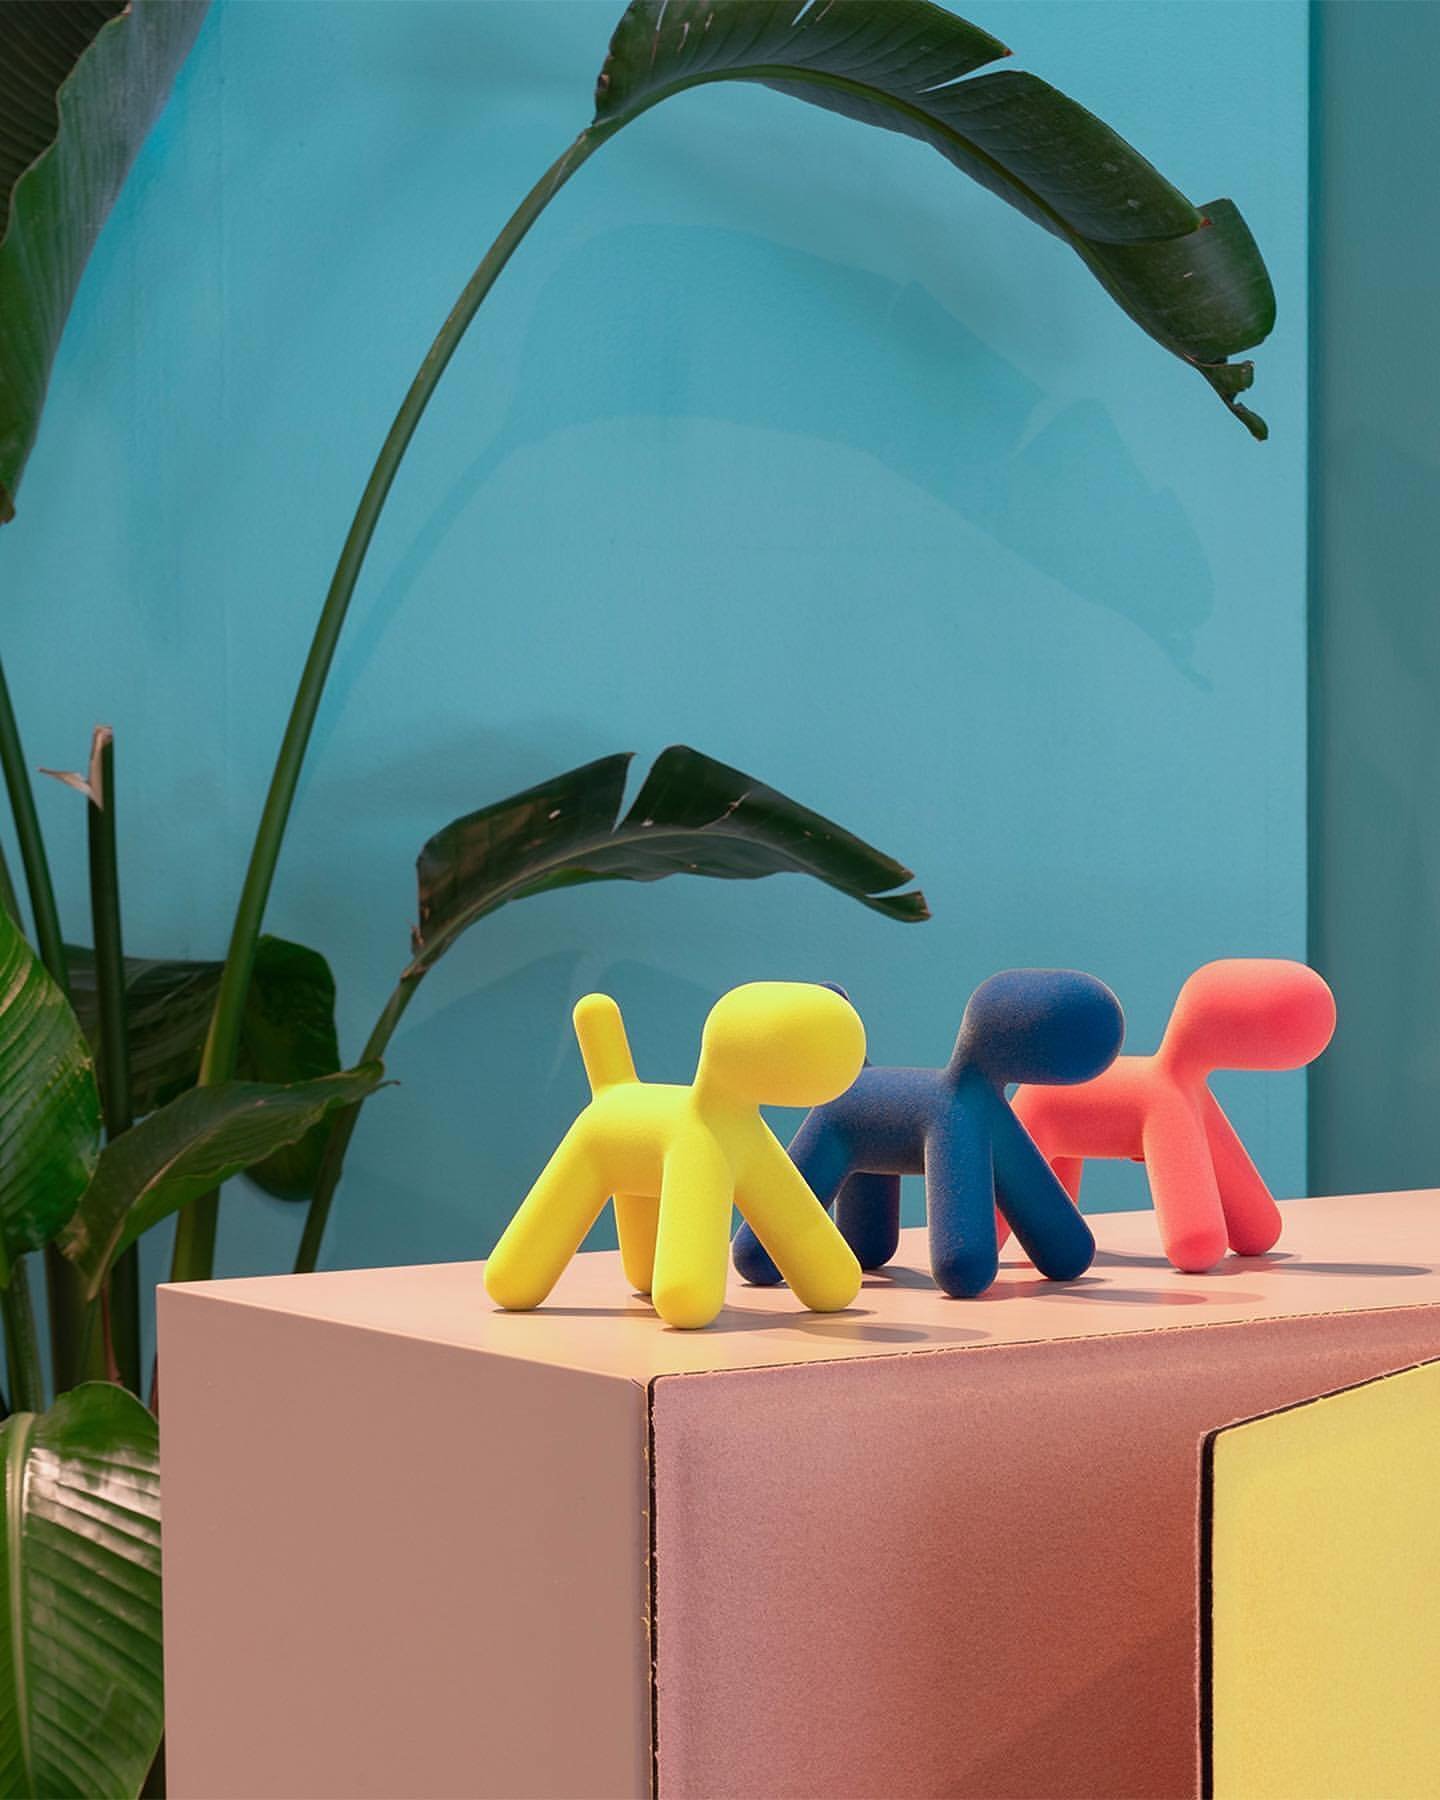 After the success of Puppy in the velvet version, this year we are launching Puppy XS in the same finish and colours.

Soft to the touch and vibrant in hue, this new version is a must-have in any design lover&rsquo;s house.

#MagisOfficial #designlov